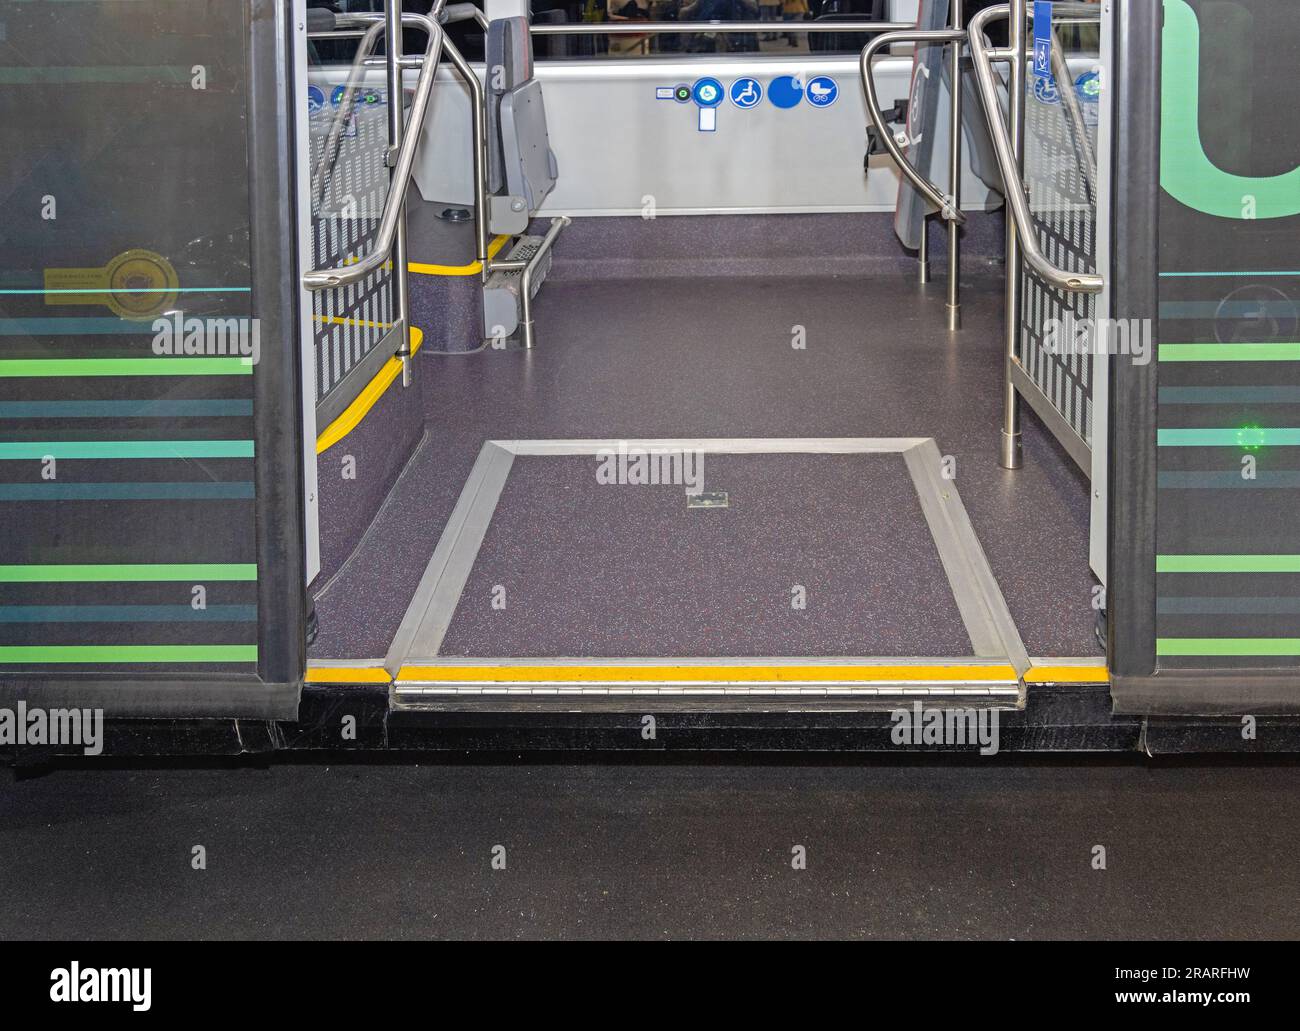 Automated Wheelchair Loading Ramp at Low Floor City Bus Public Transport Stock Photo